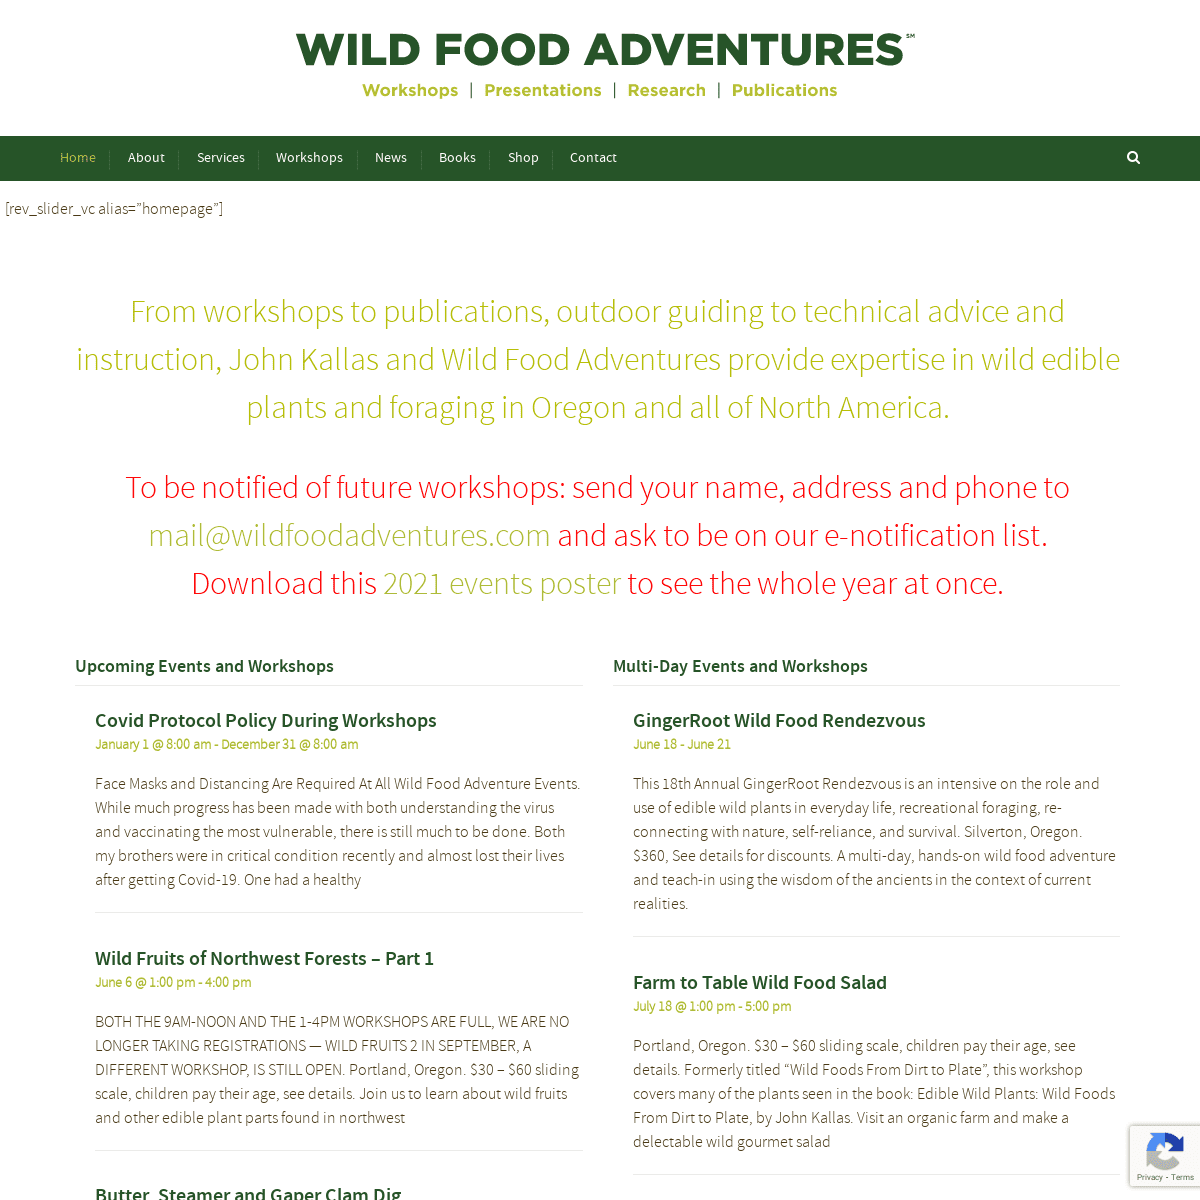 A complete backup of https://wildfoodadventures.com